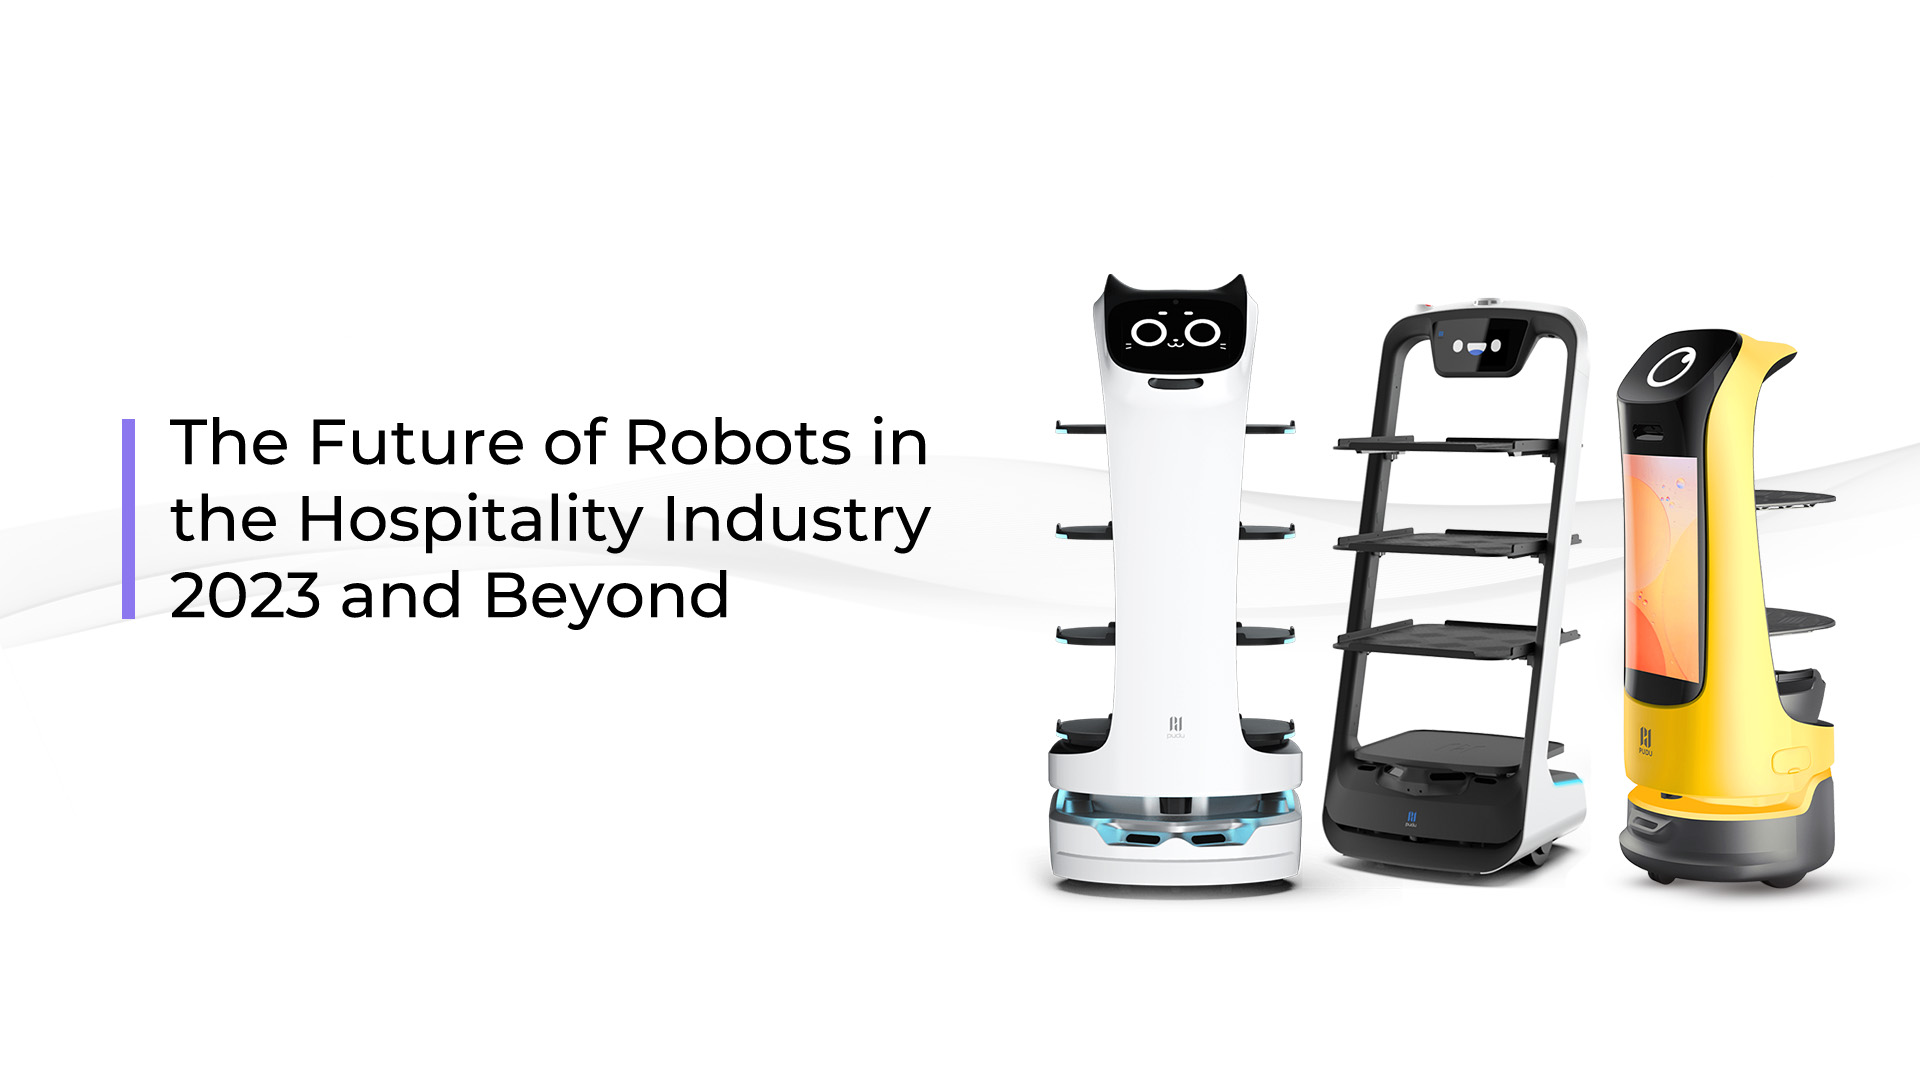 The Future of Robots in the Hospitality Industry 2023 and Beyond